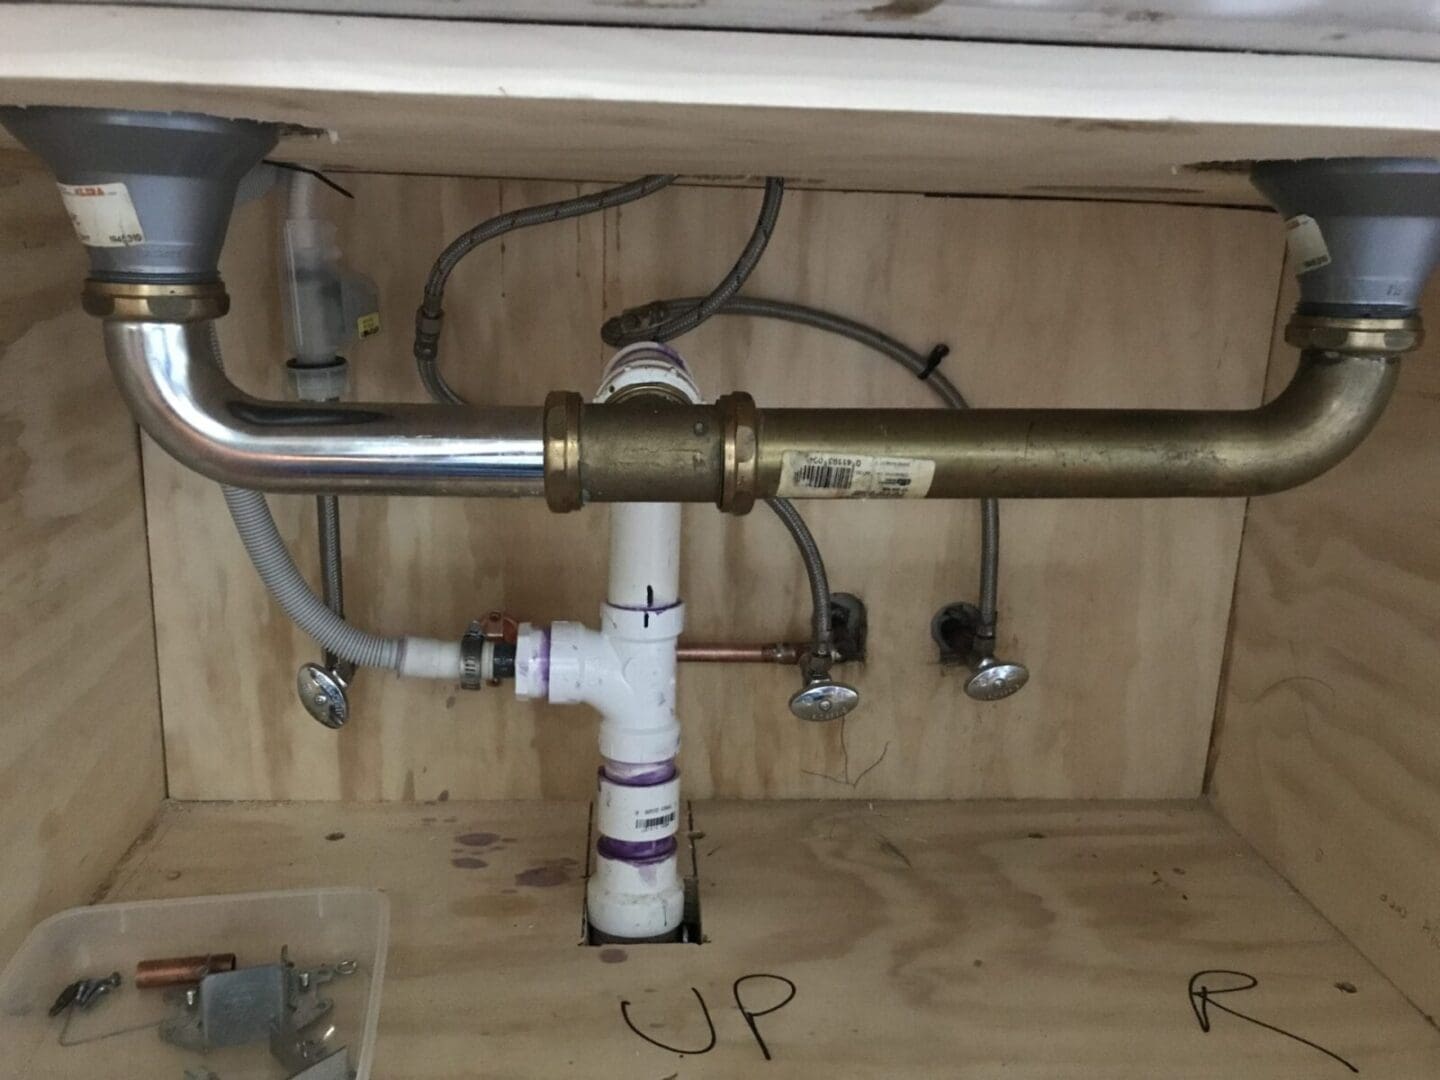 A plumbing project